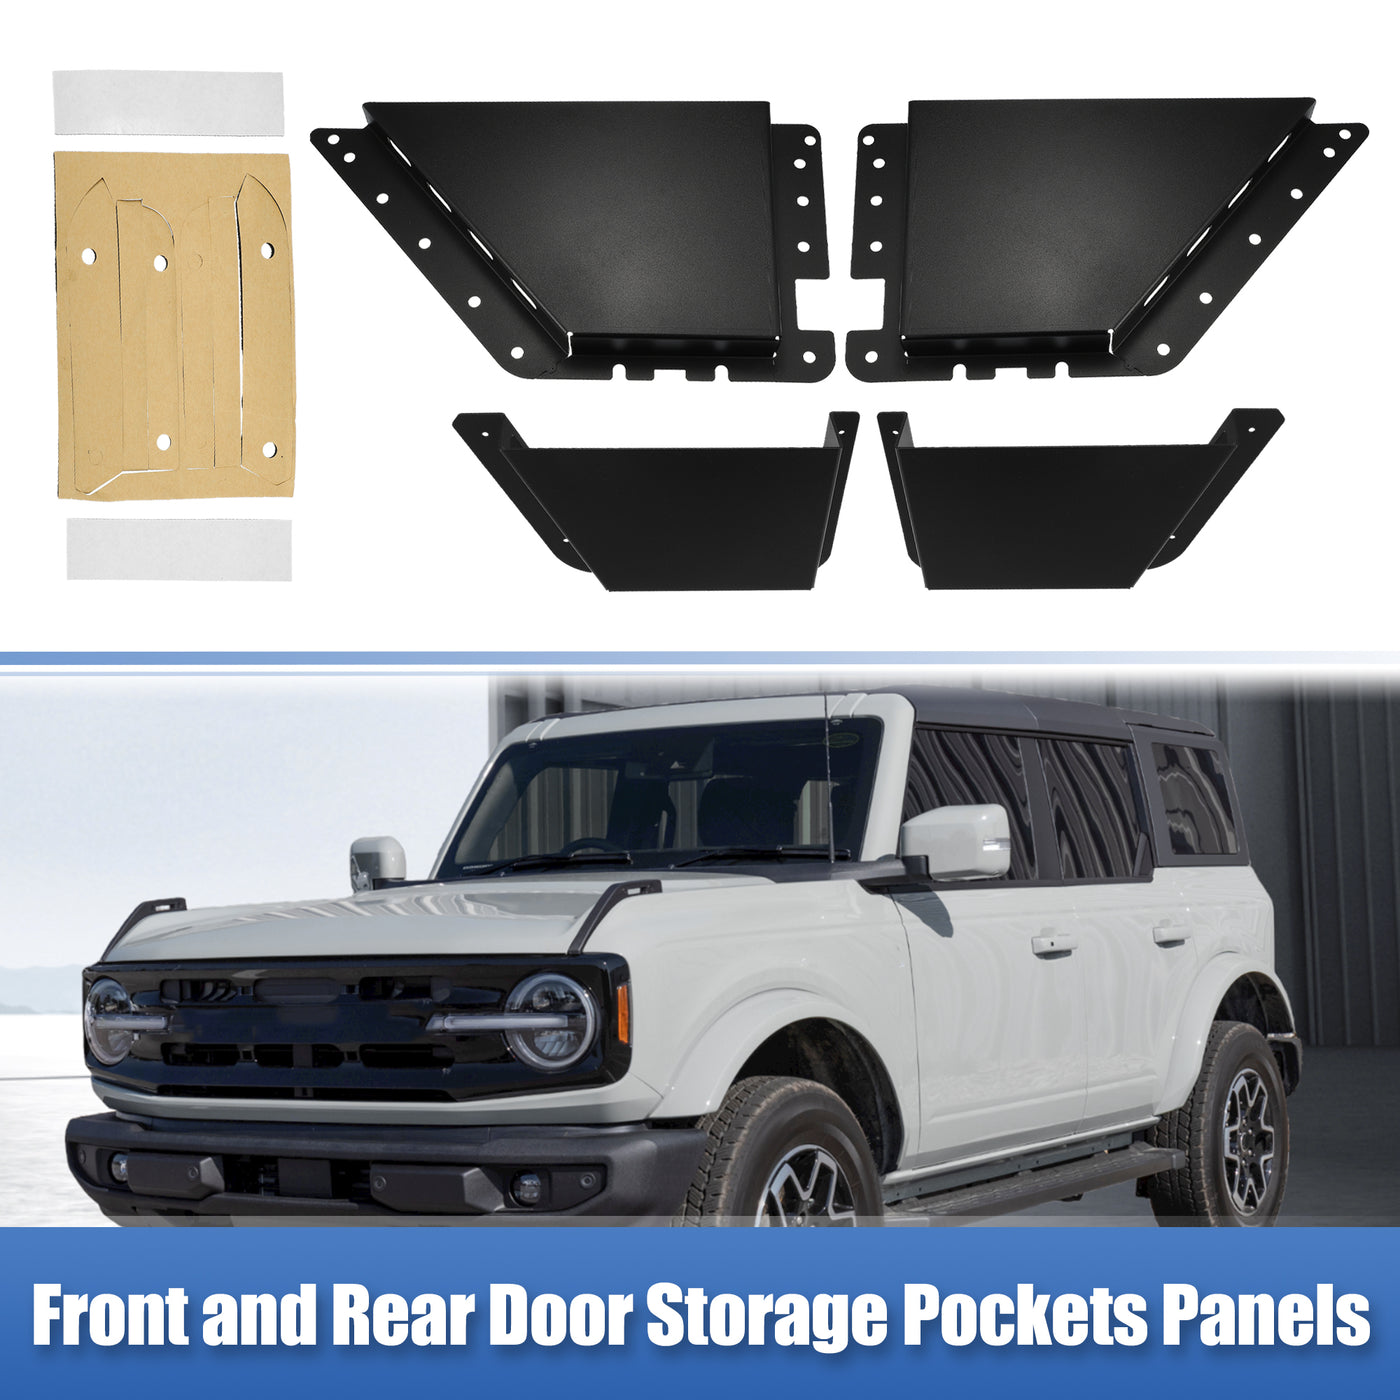 X AUTOHAUX Front and Rear Door Storage Pockets Panels for Ford Bronco 2021 2022 2 4 Door Car Door Side Insert Organizer Box Interior Expansion Accessories 2 Pair